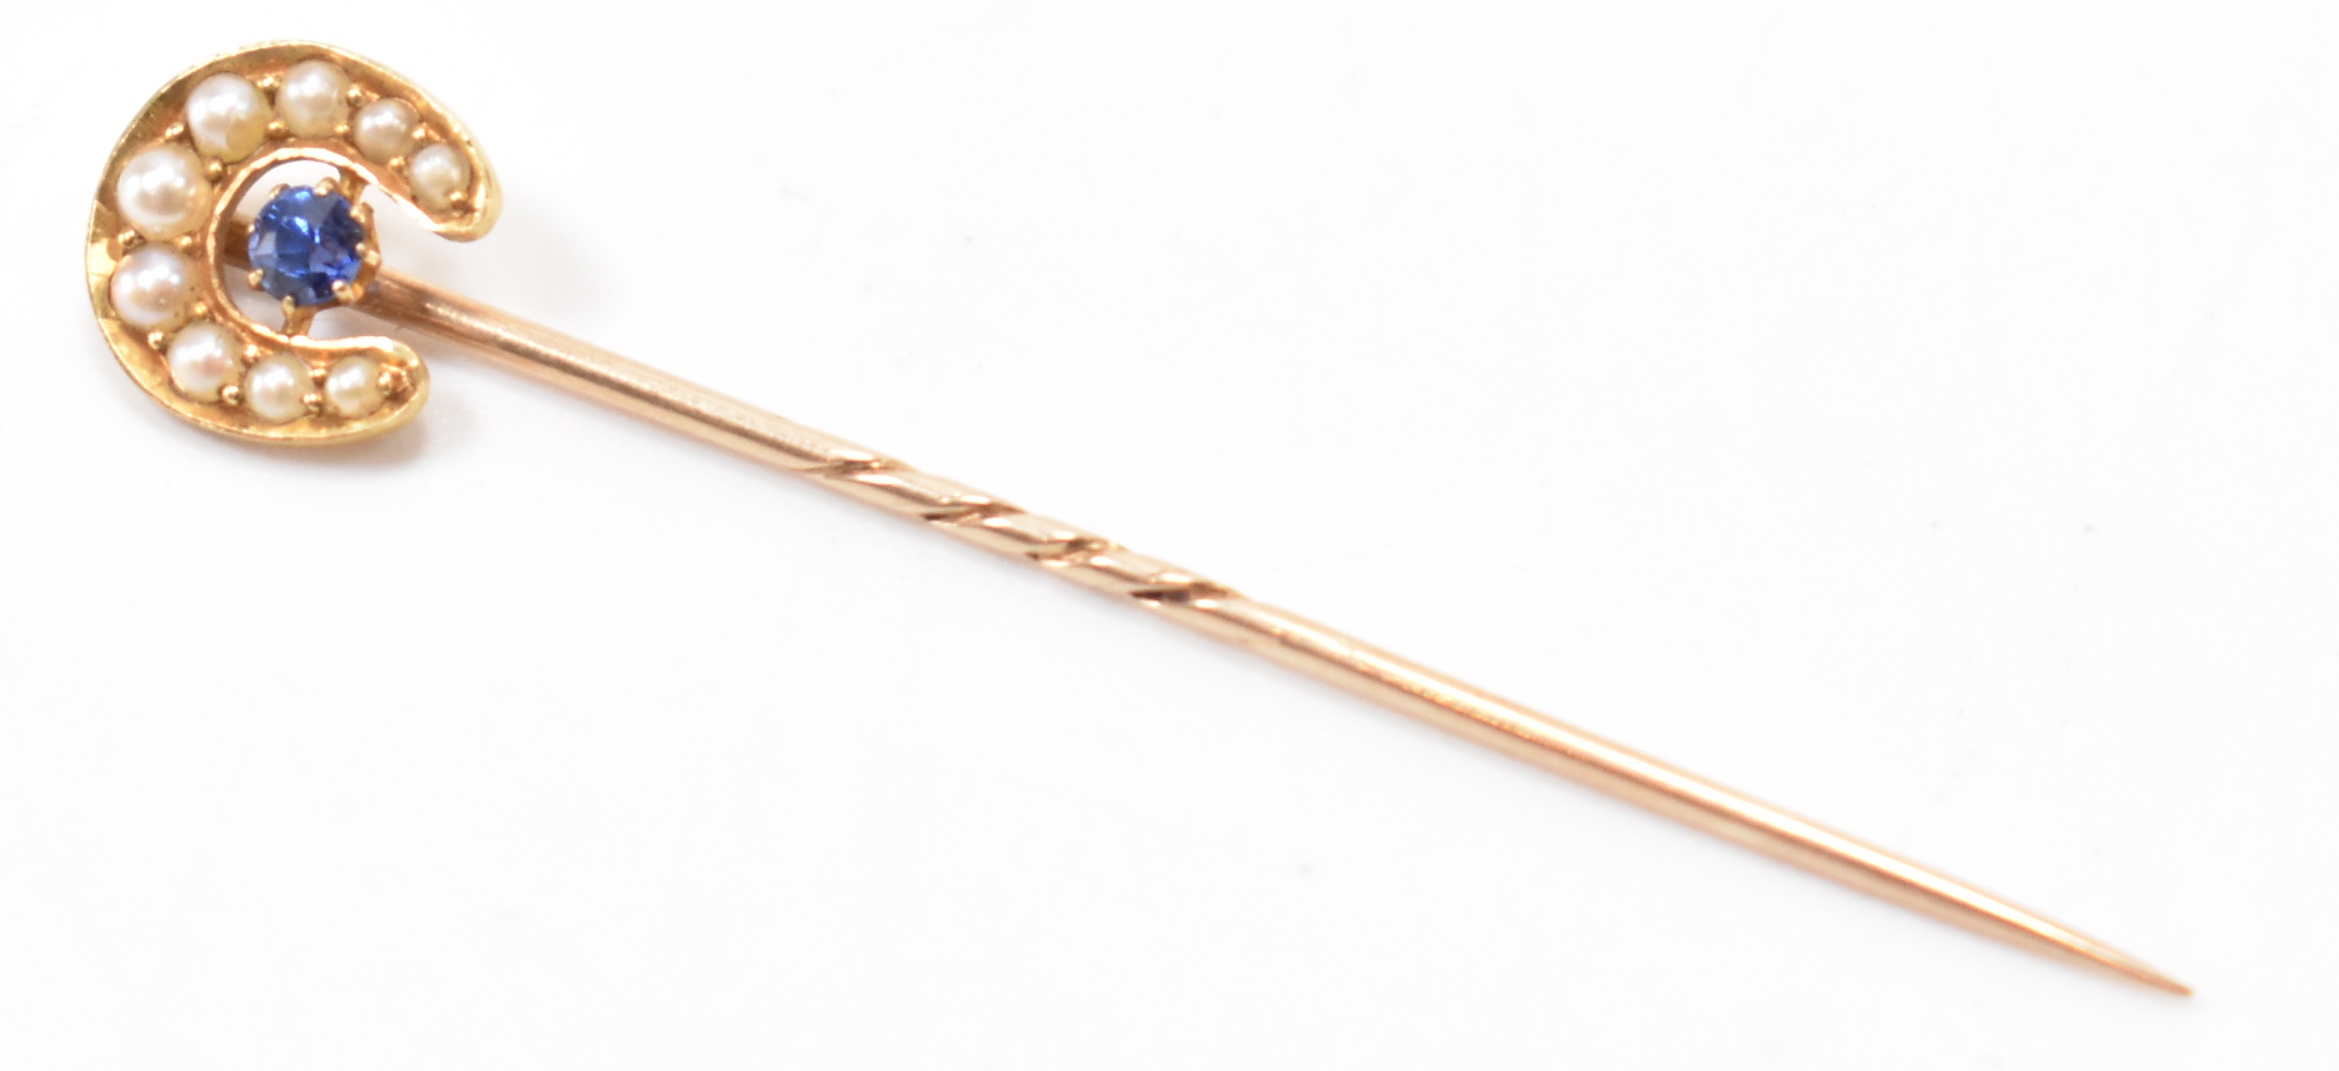 ANTIQUE GOLD SEED PEARL & SAPPHIRE STICK PIN - Image 4 of 4